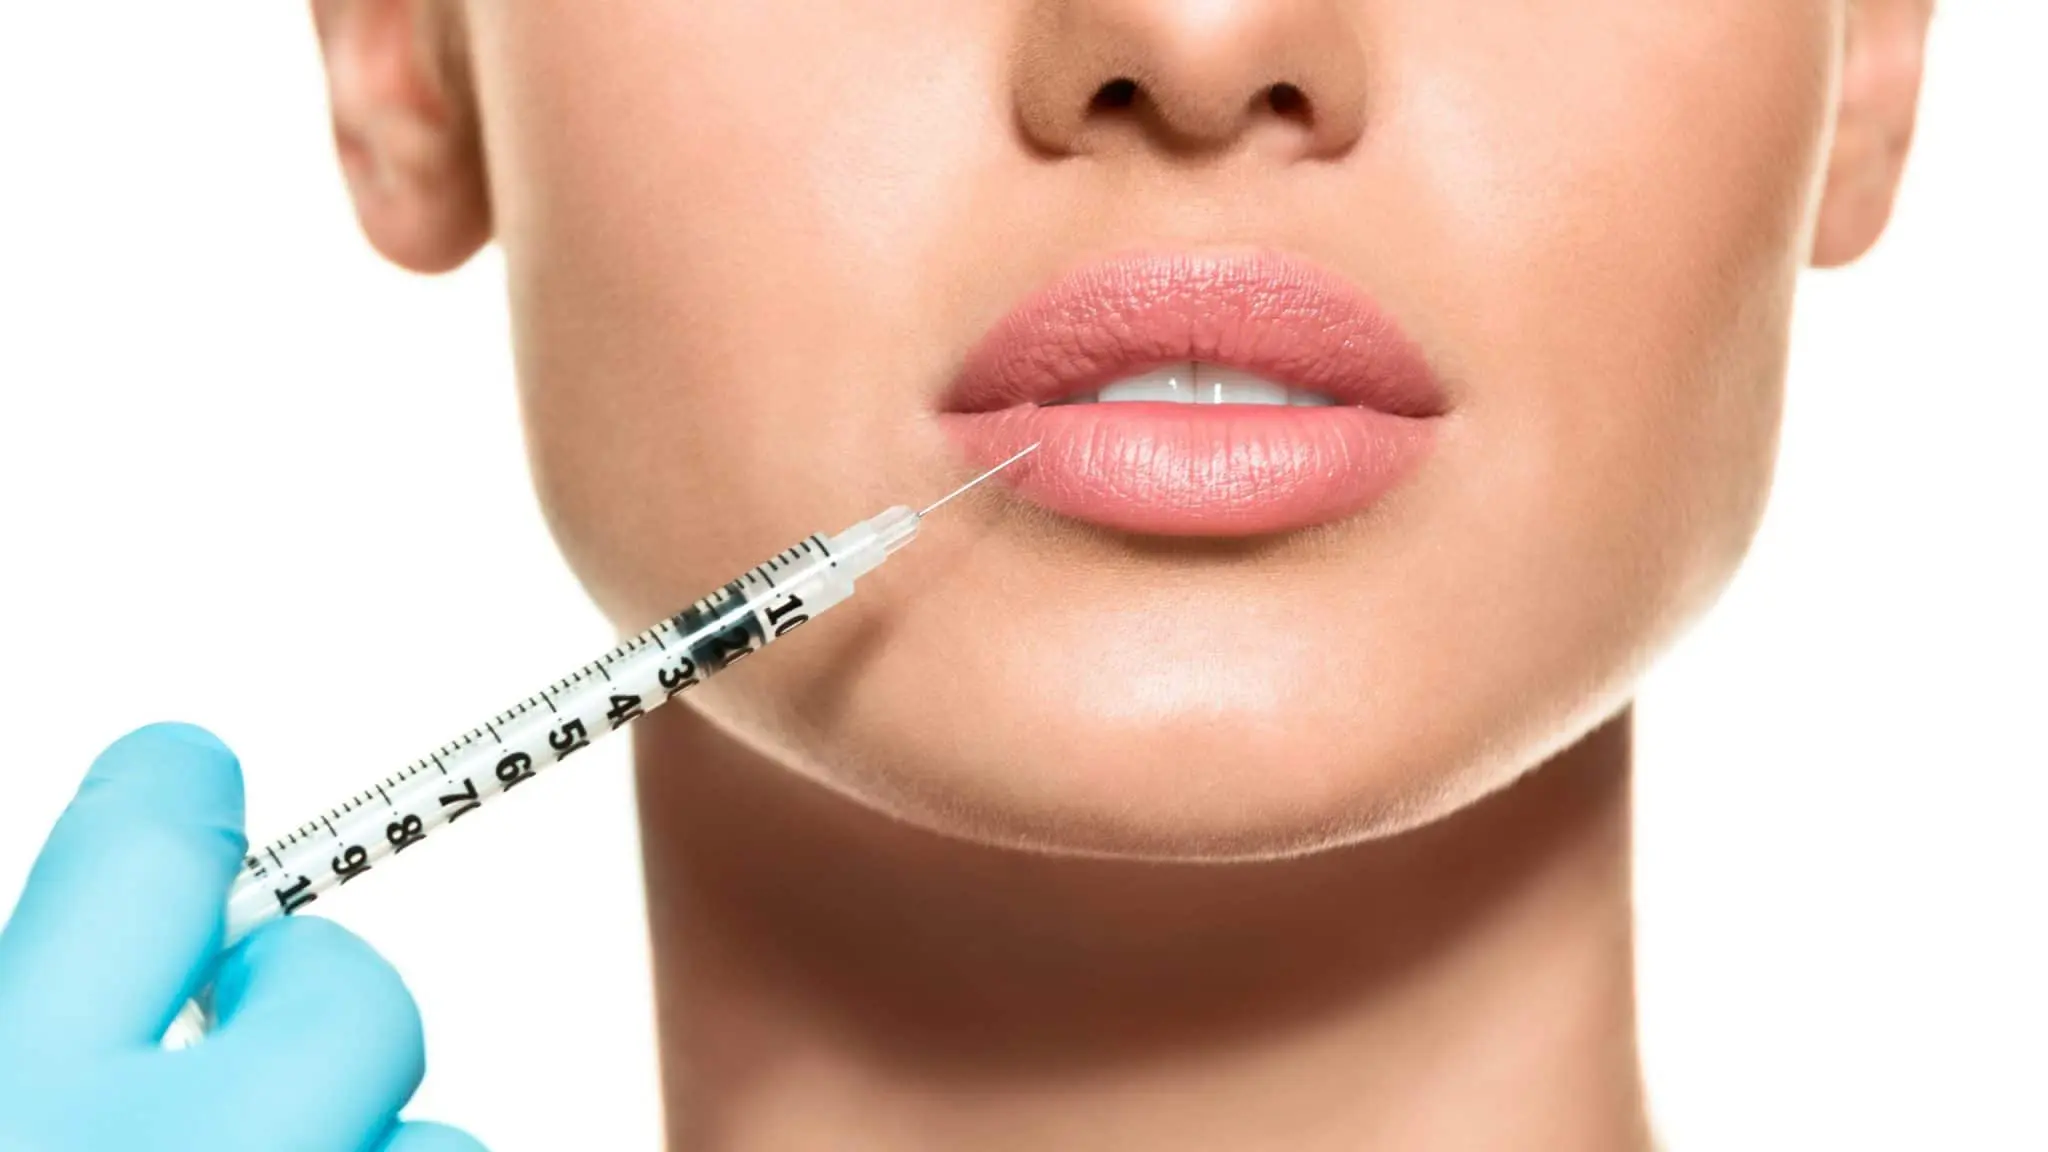 Lady receiving lip filler injection